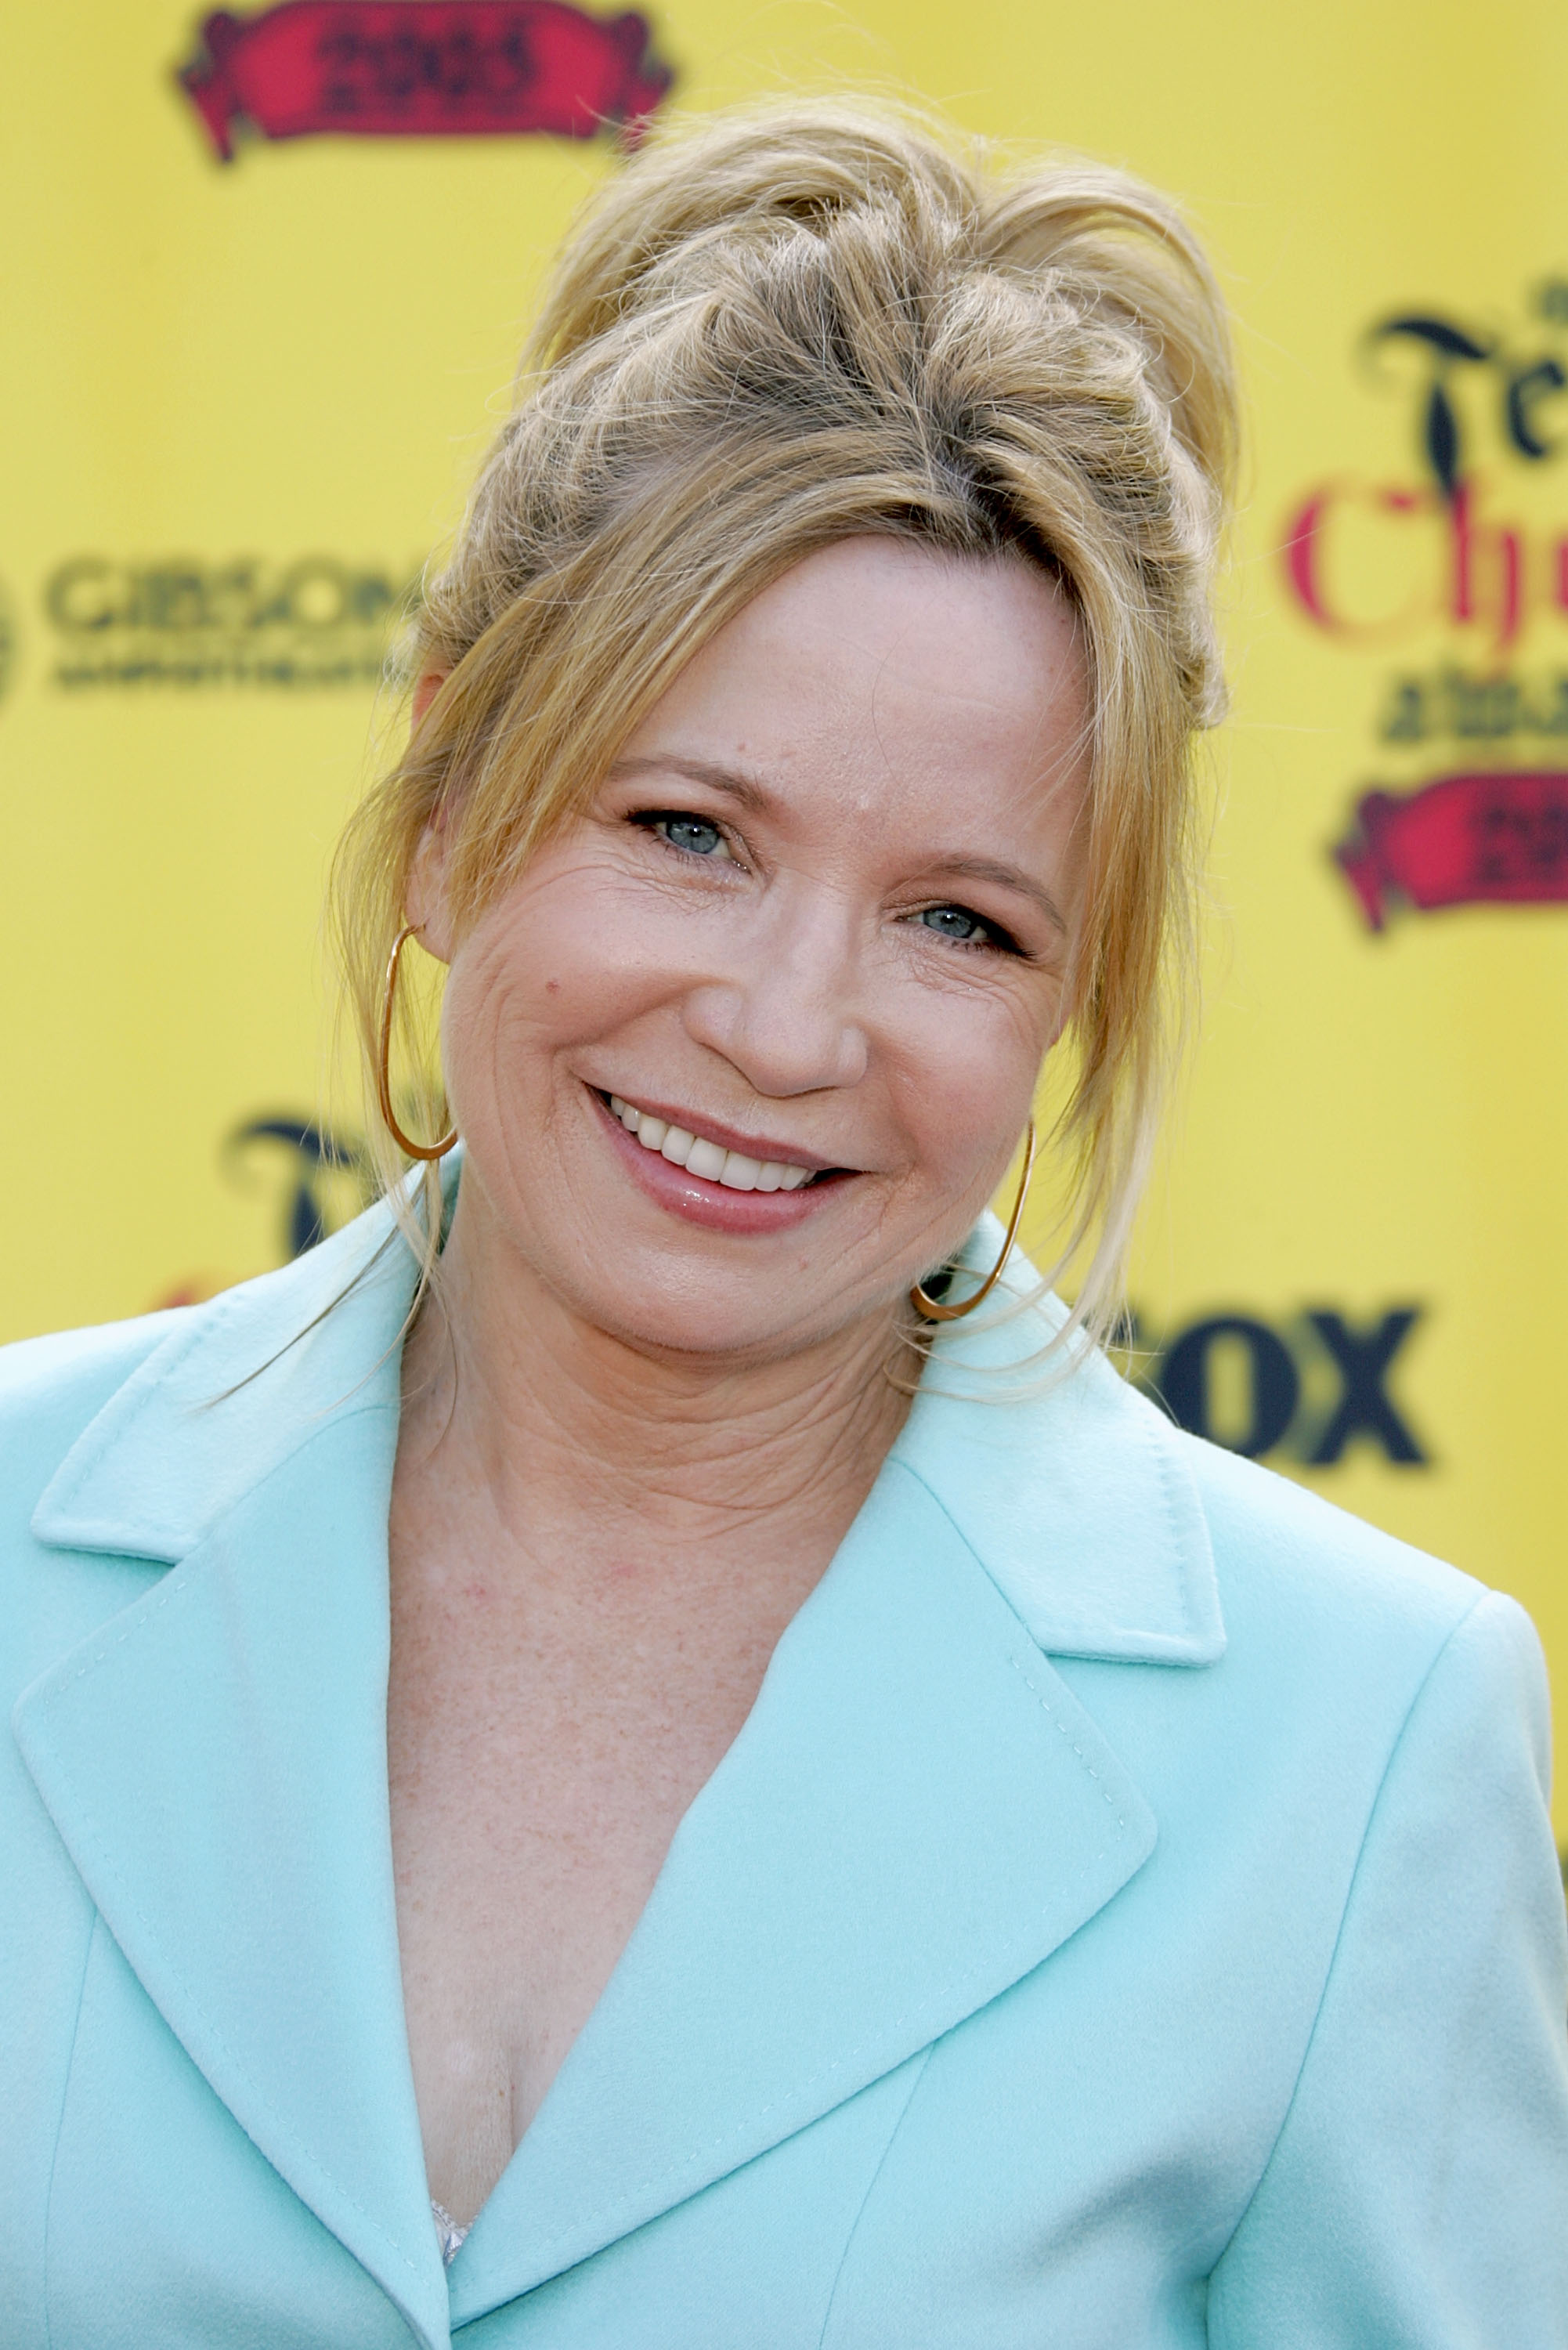 Debra Jo Rupp Hasnt Married In Real Life Or Her Marital Life Exists On